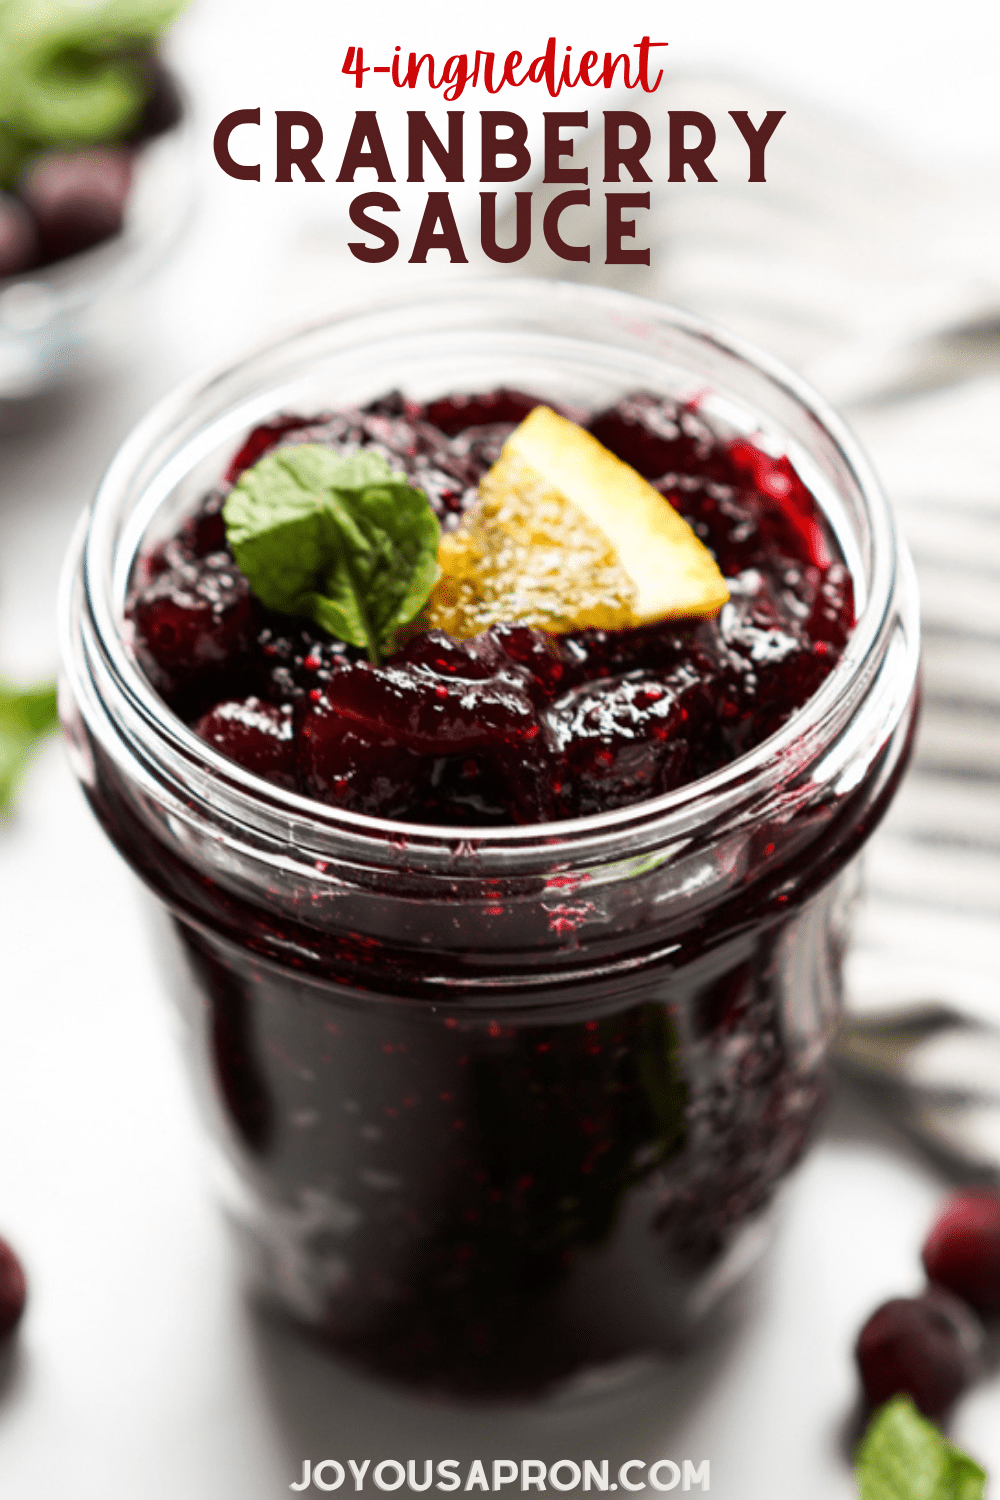 Cranberry Sauce - homemade, 4-ingredient classic cranberry sauce. Sweet, tart and chunky homemade cranberry sauce that is easy to make and perfect for the Thanksgiving and Christmas holidays! via @joyousapron